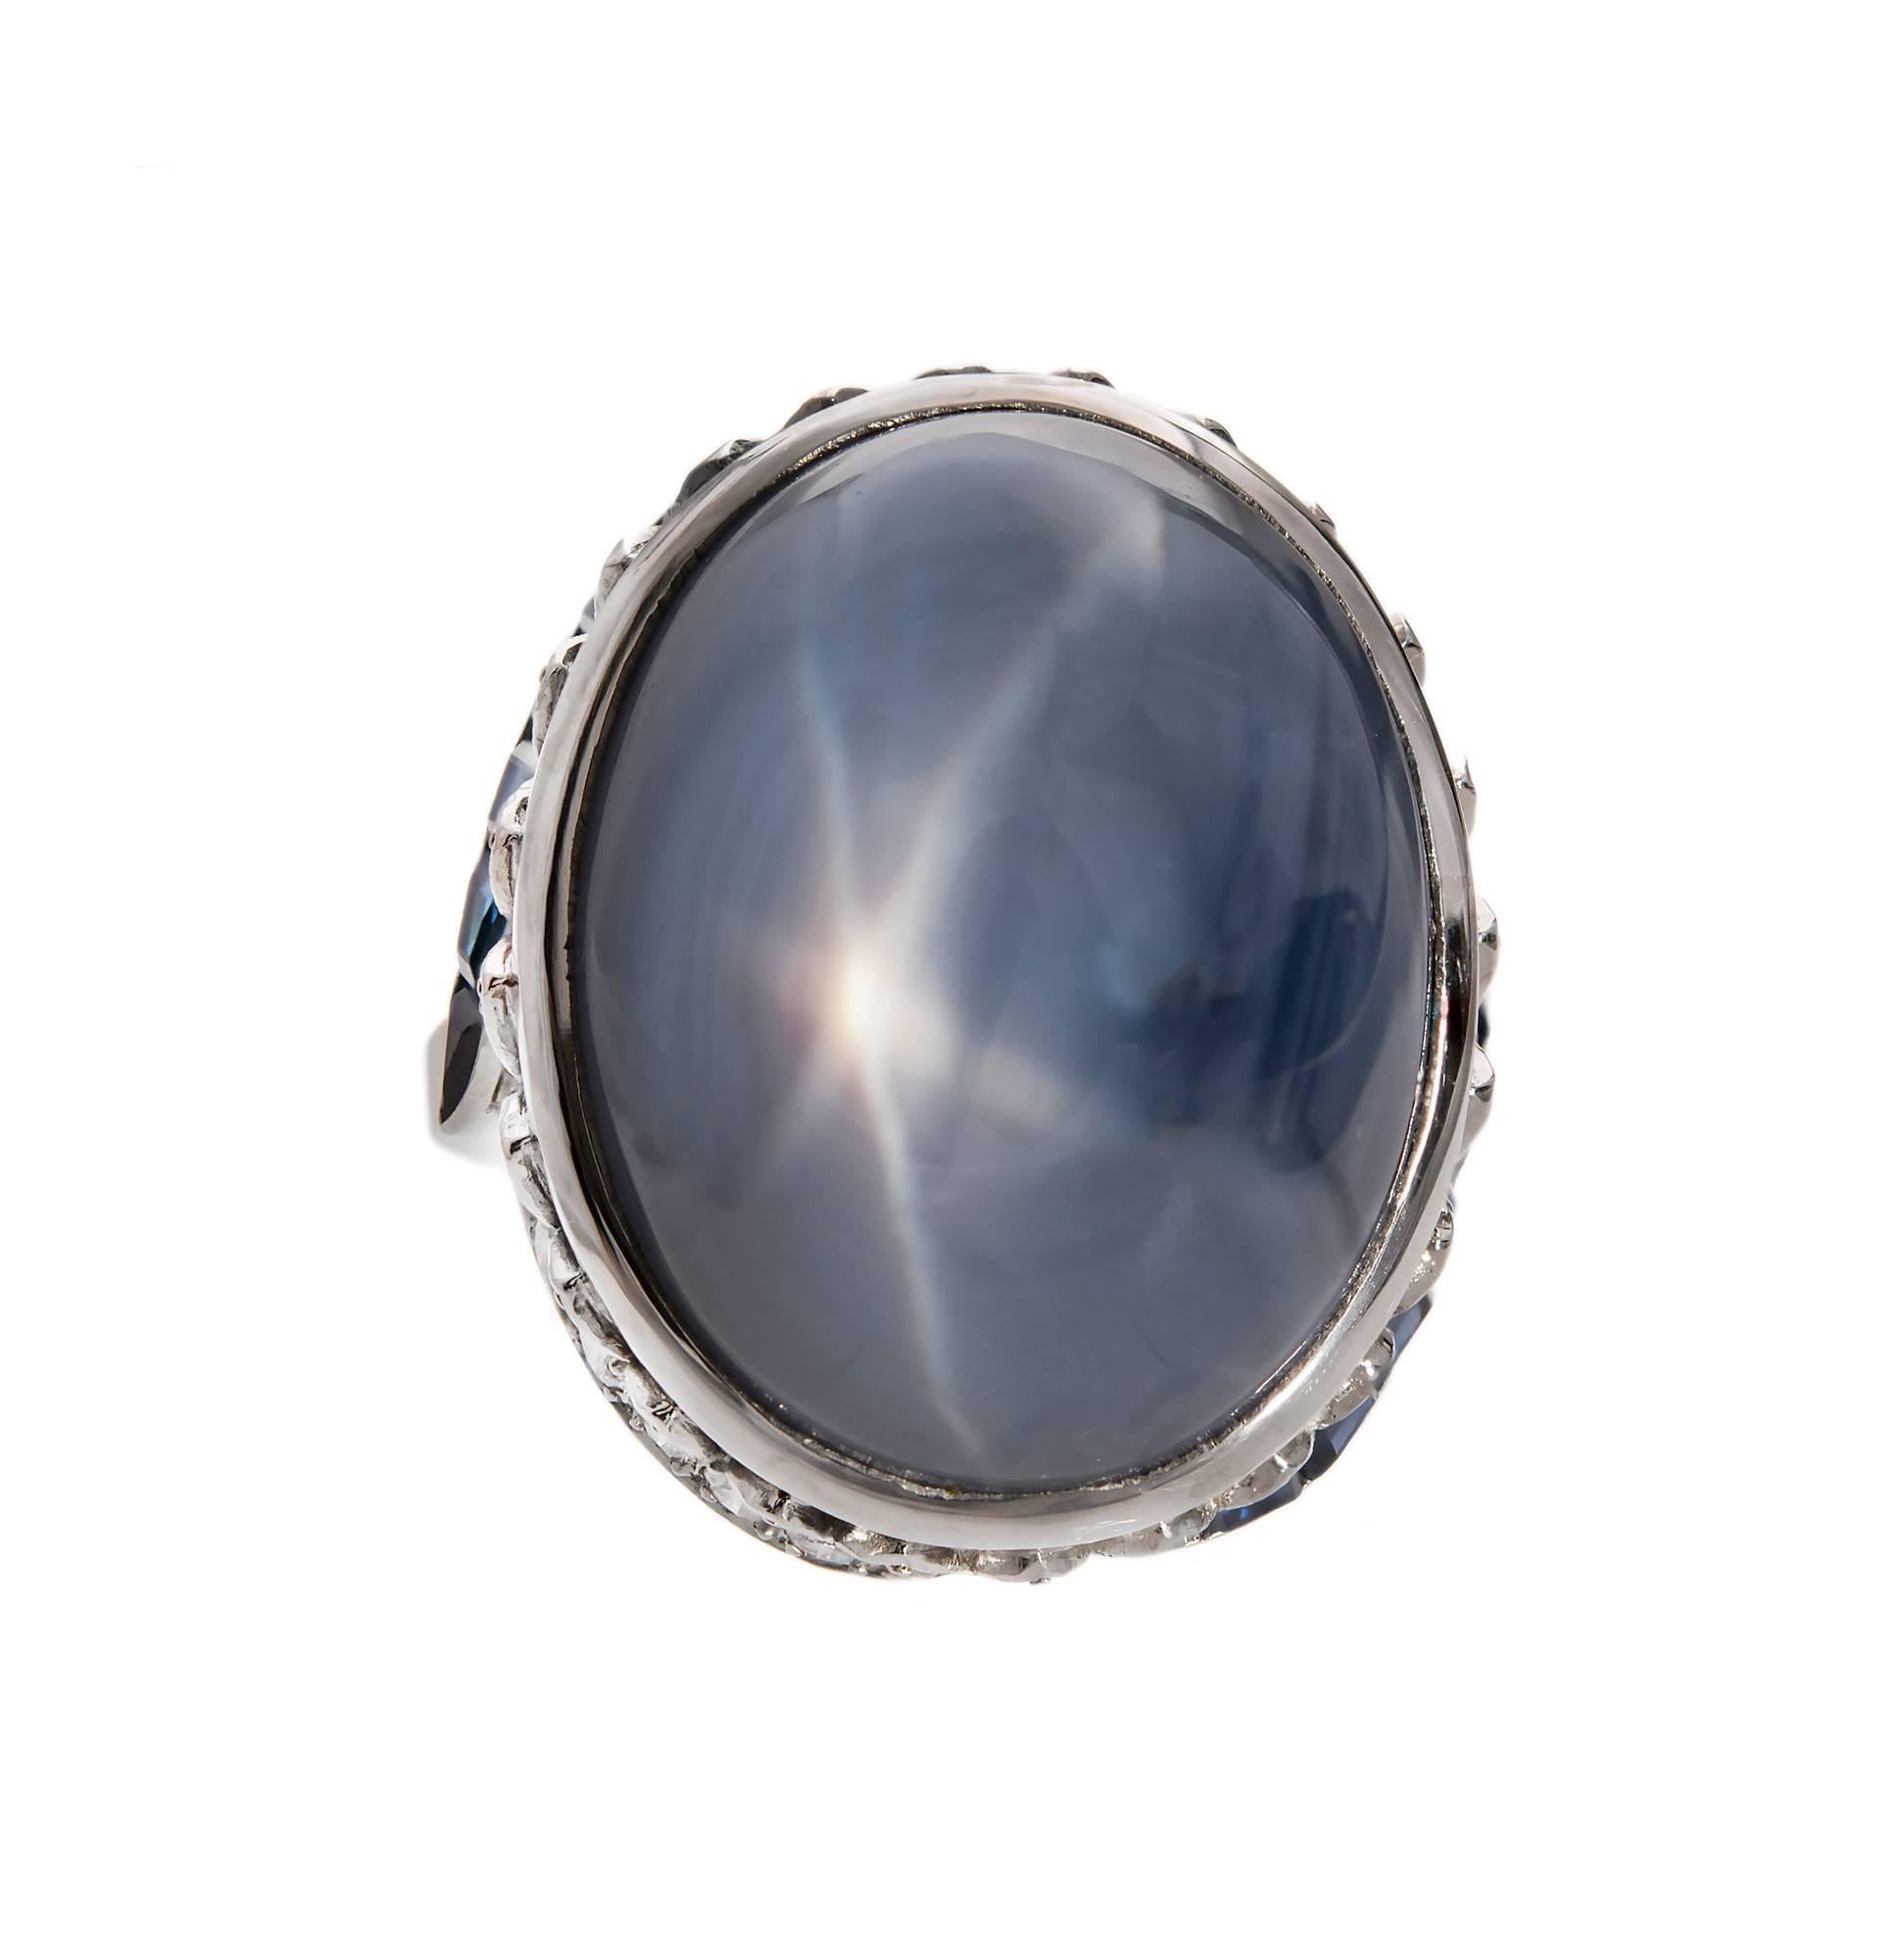 Large 1940-1950 medium blue Sapphire cabochon. Full cut diamonds and custom cut Sapphires.

1 oval blue cabochon star Sapphire, approx. total weight 52.50cts, no heat, 20.50 x 16.06 x 15.64mm, GIA certificate #2171534348
50 round full cut diamonds,